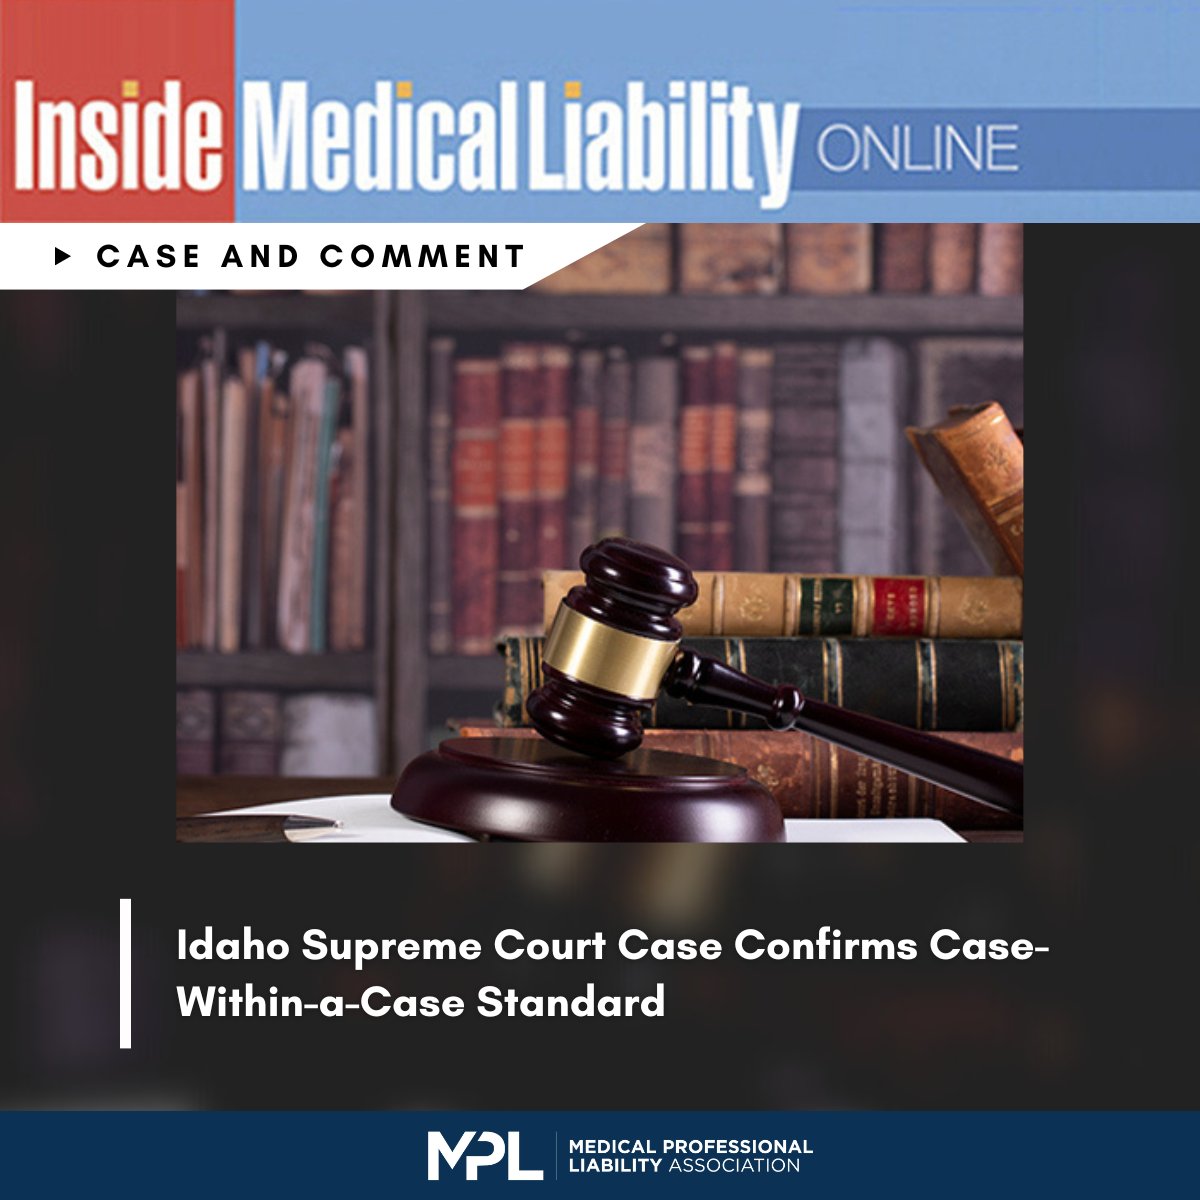 This decision from the Idaho Supreme Court represents an important professional liability development, as it confirms the applicability of the case-within-a-case standard. This IML Online article is available to MPL Association members and partners. bit.ly/49wCWR8